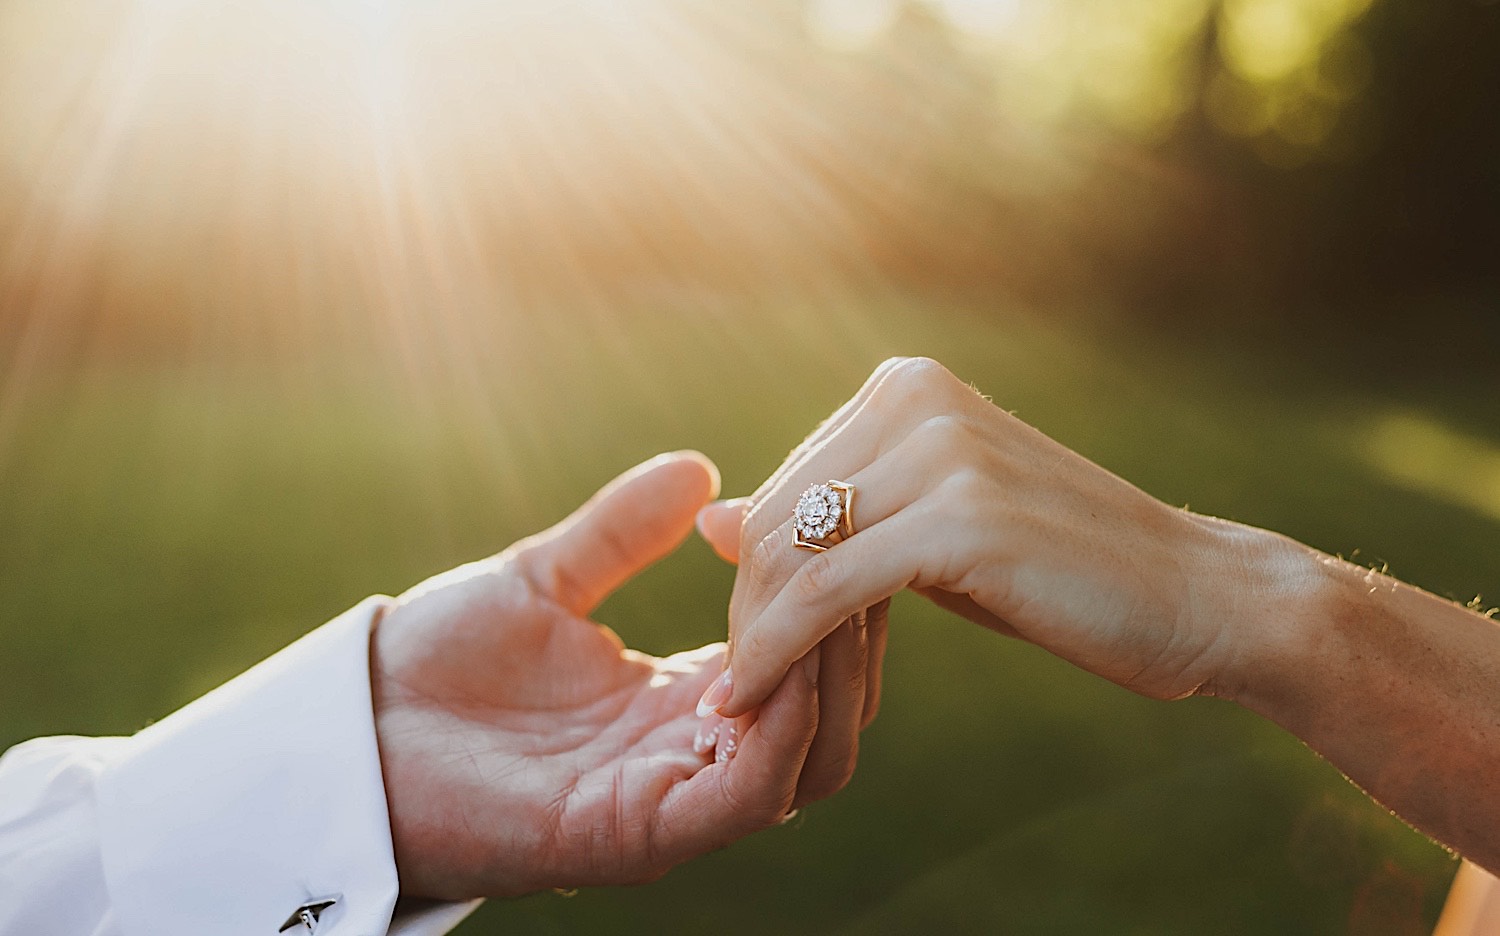 Close up photo of a woman's hand with a wedding ring resting on a man's hand while the sun sets in the background